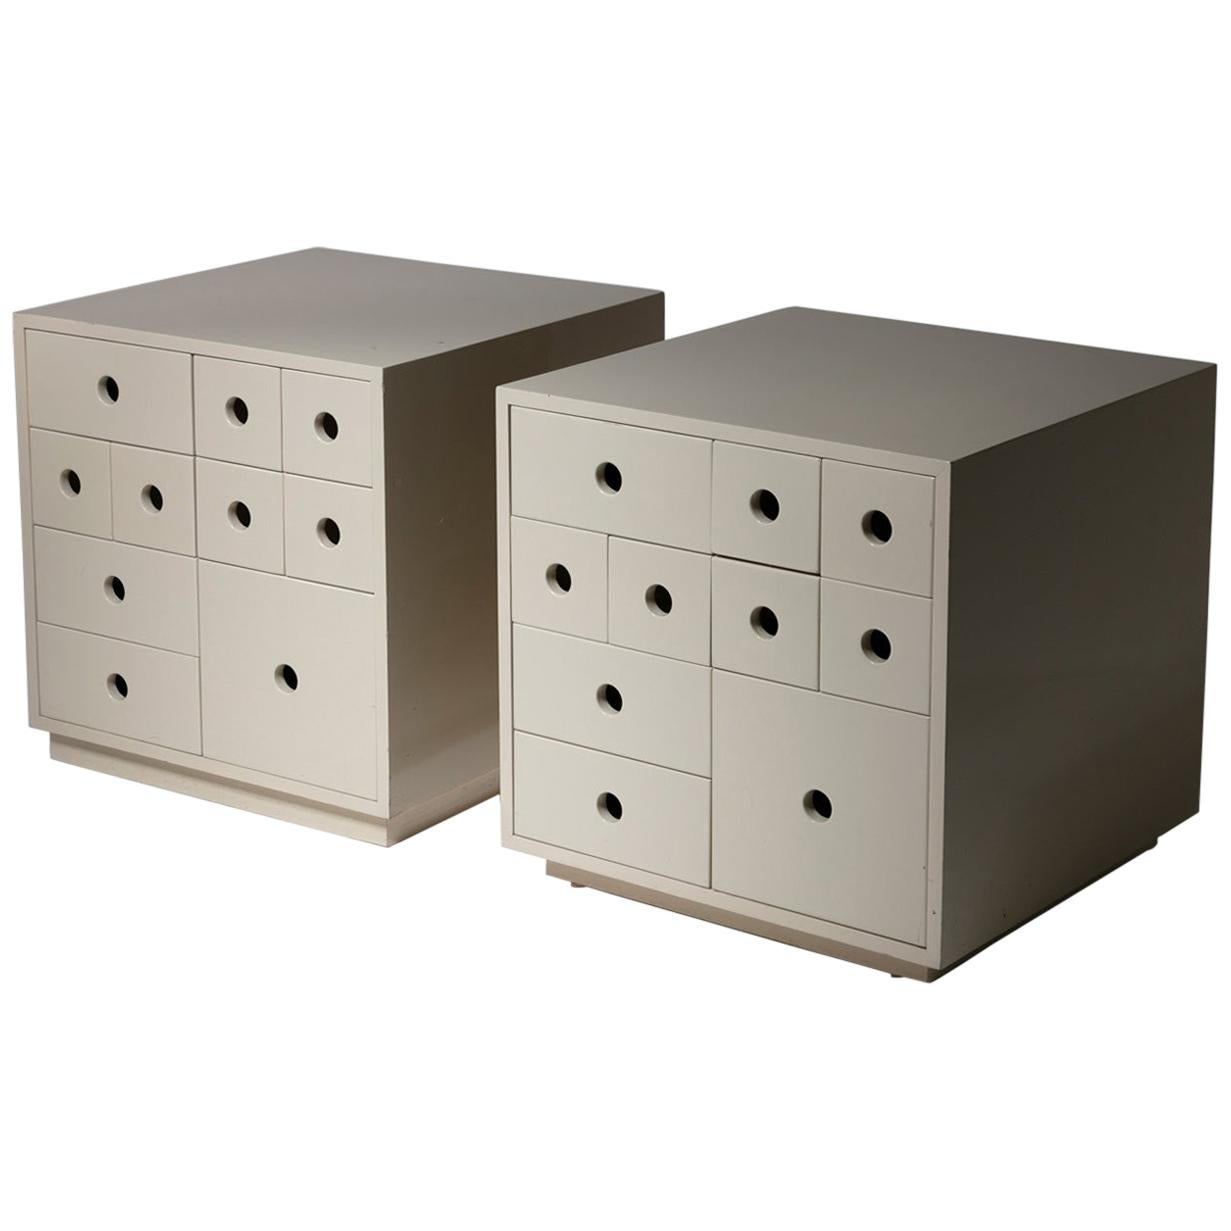 Pair of "Indro" Storage Unit by Paolo Tommasi by Delta